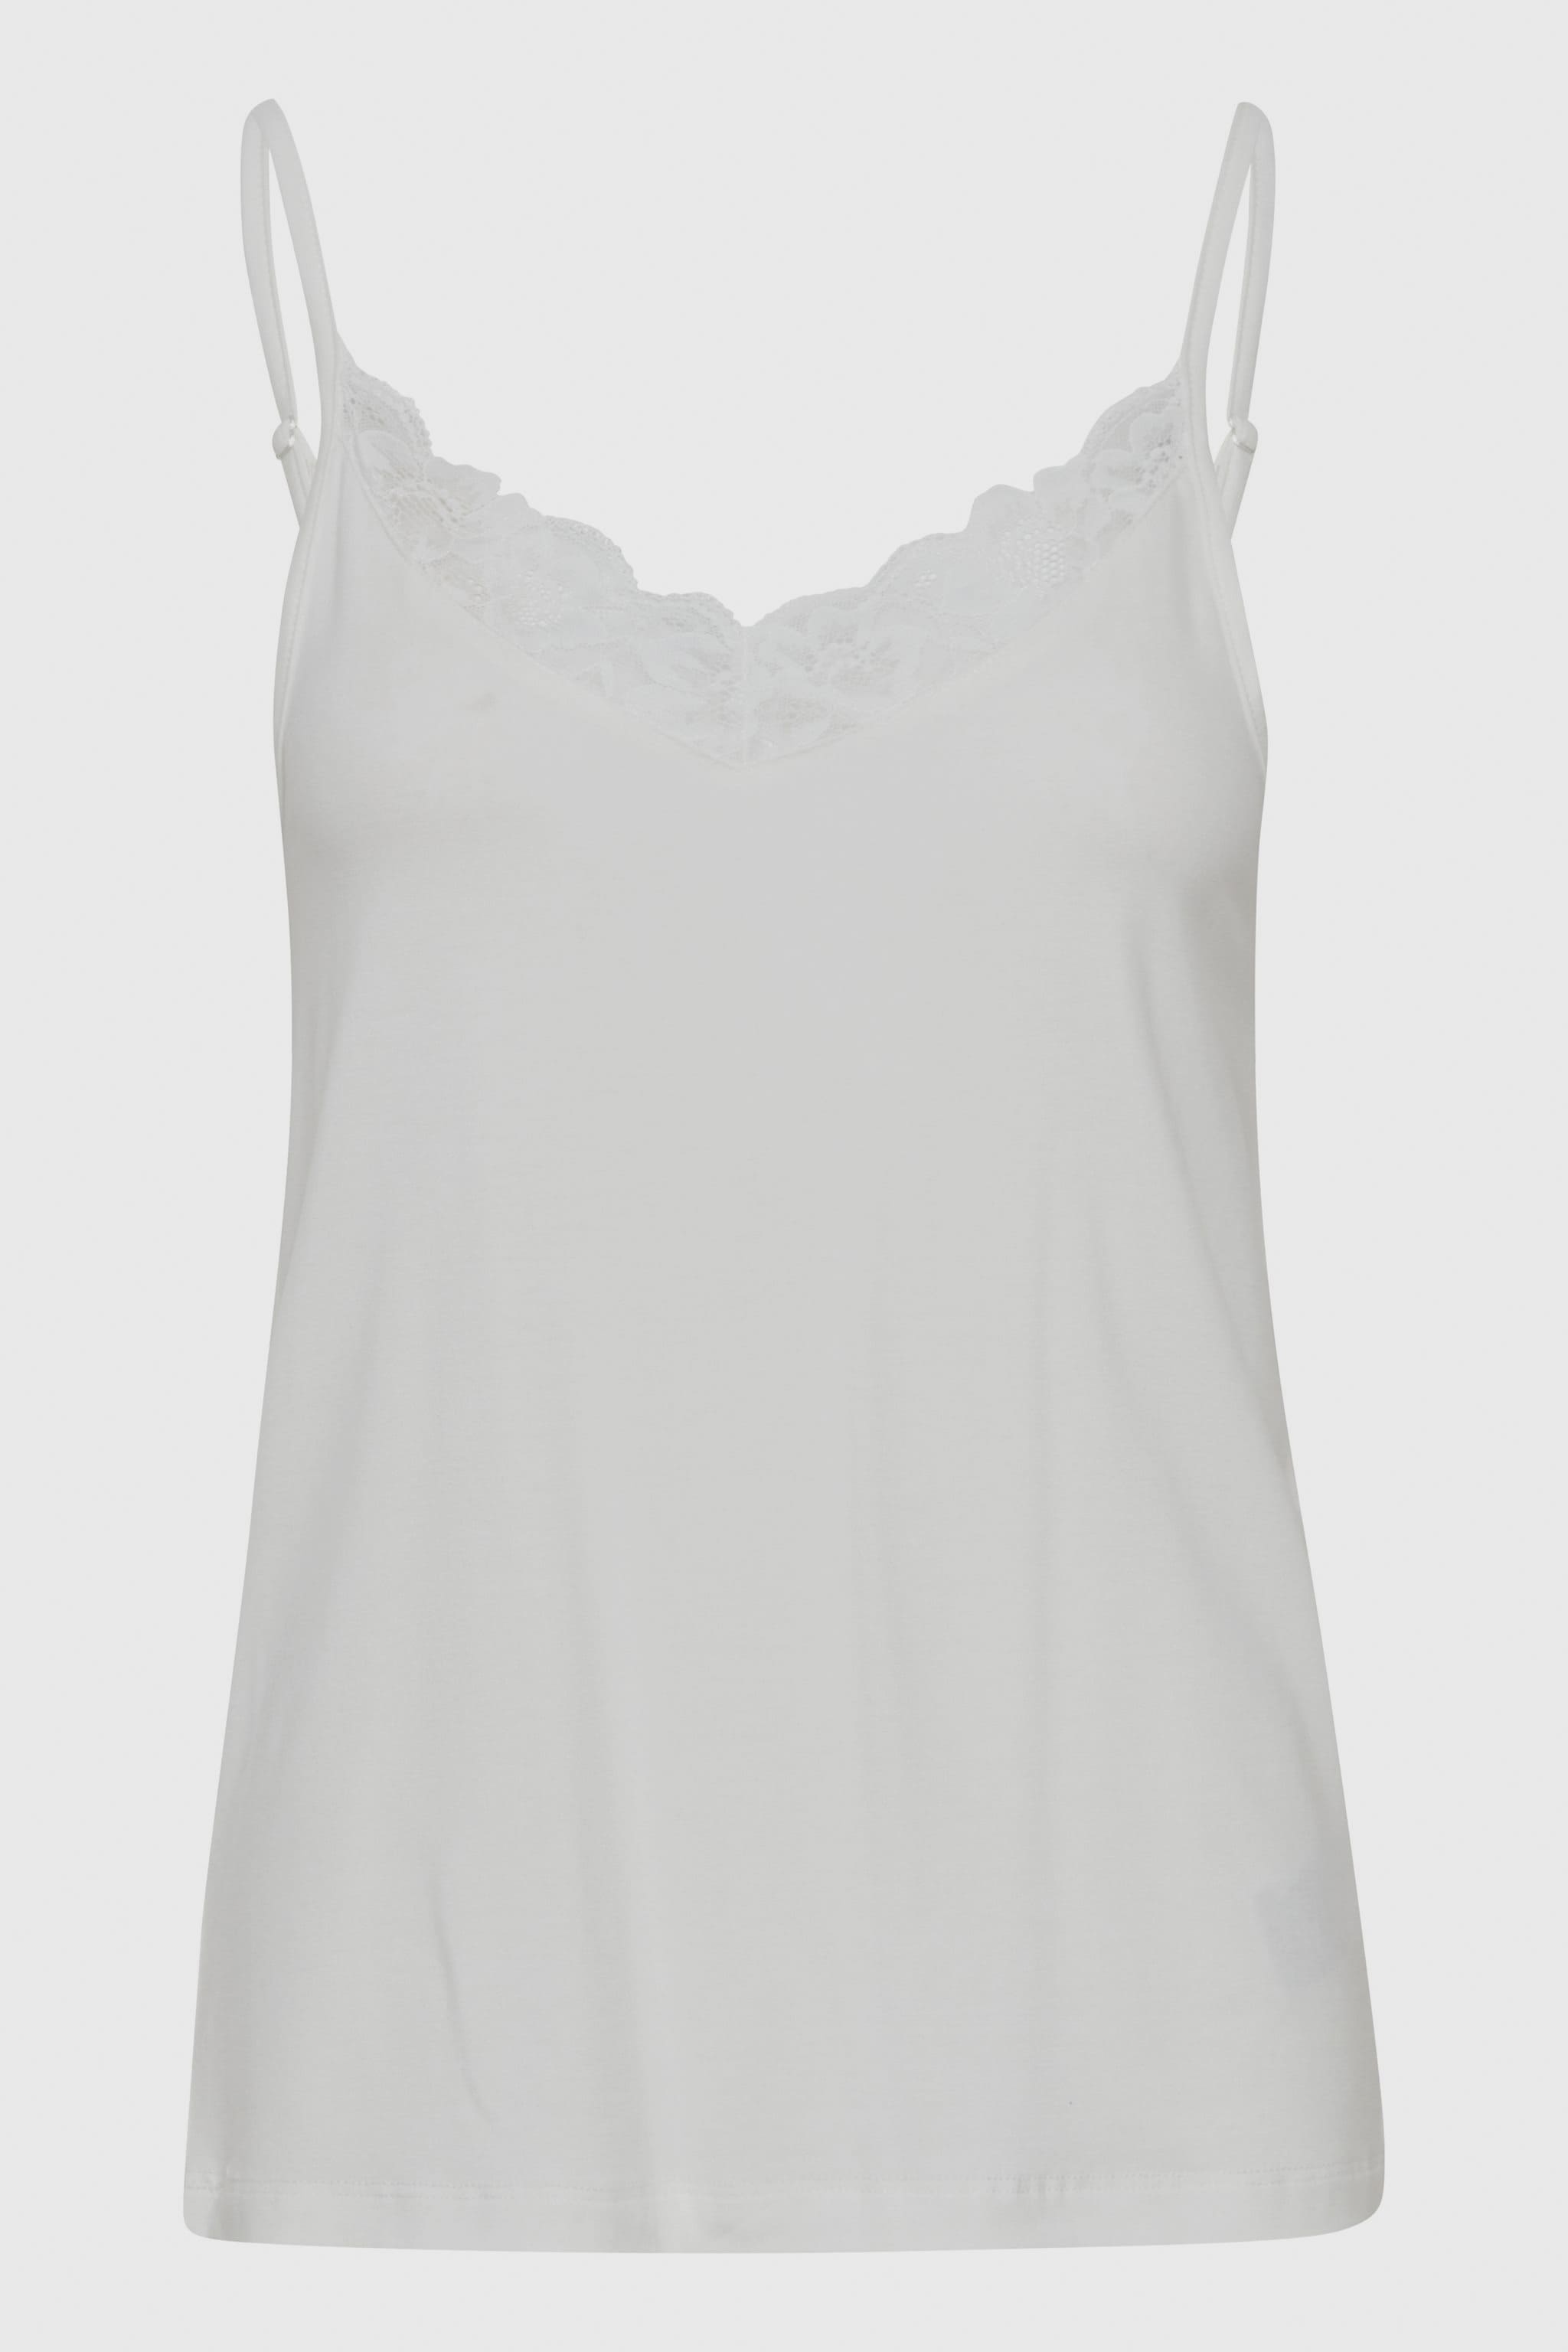 Camisole B.YOUNG - 20811088 - B. Young